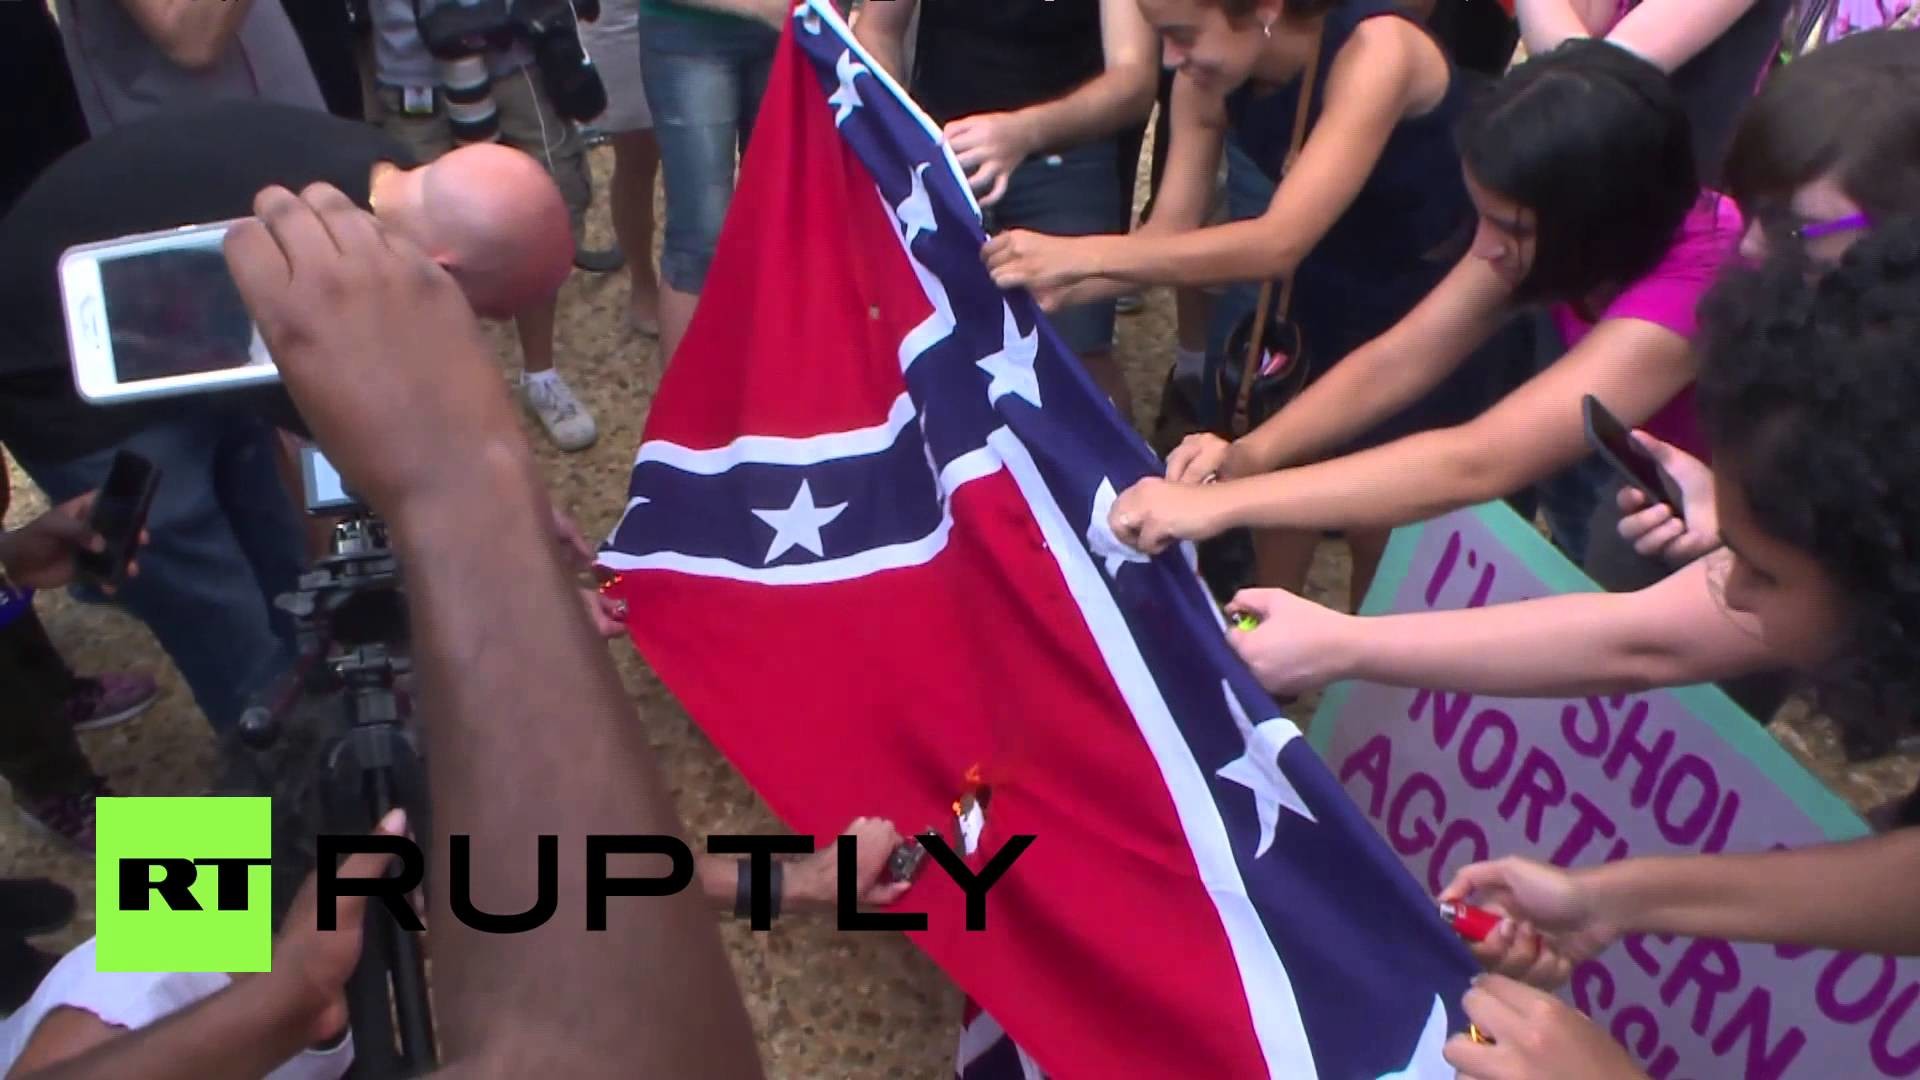 1920x1080 USA: Confederate flag rally met by counter-protesters burning flag